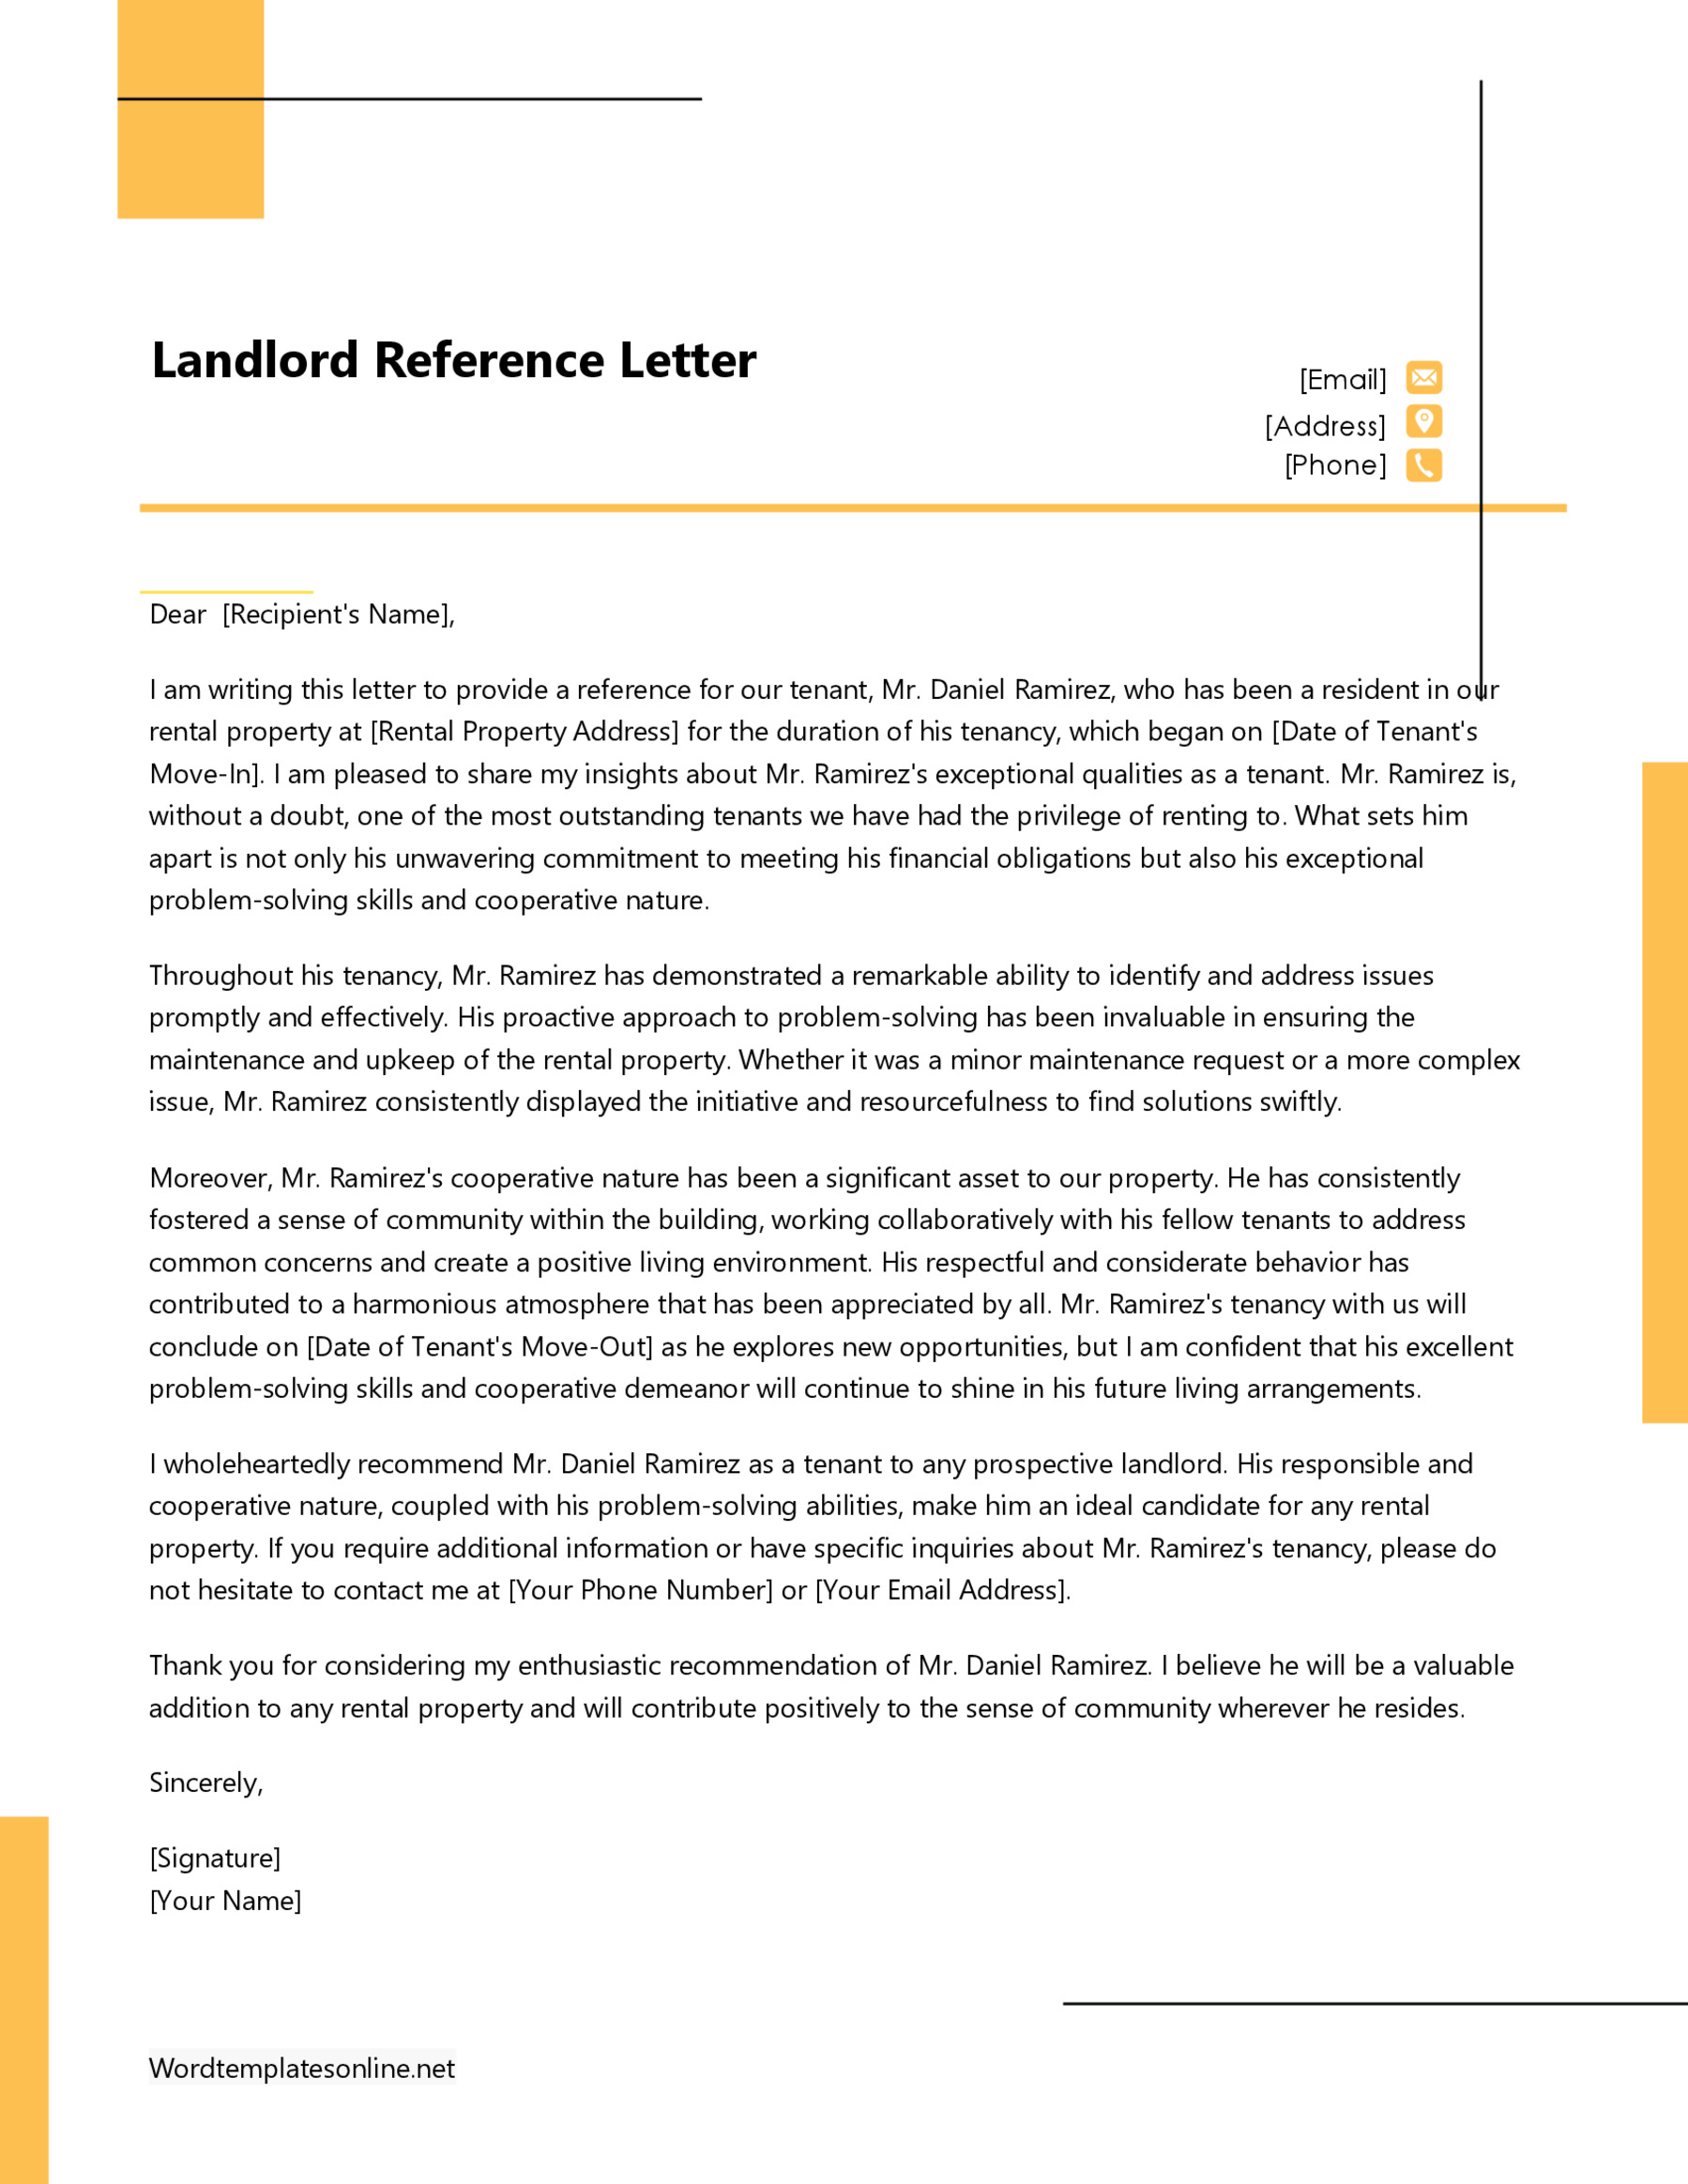 Landlord Reference Letter Template Layout